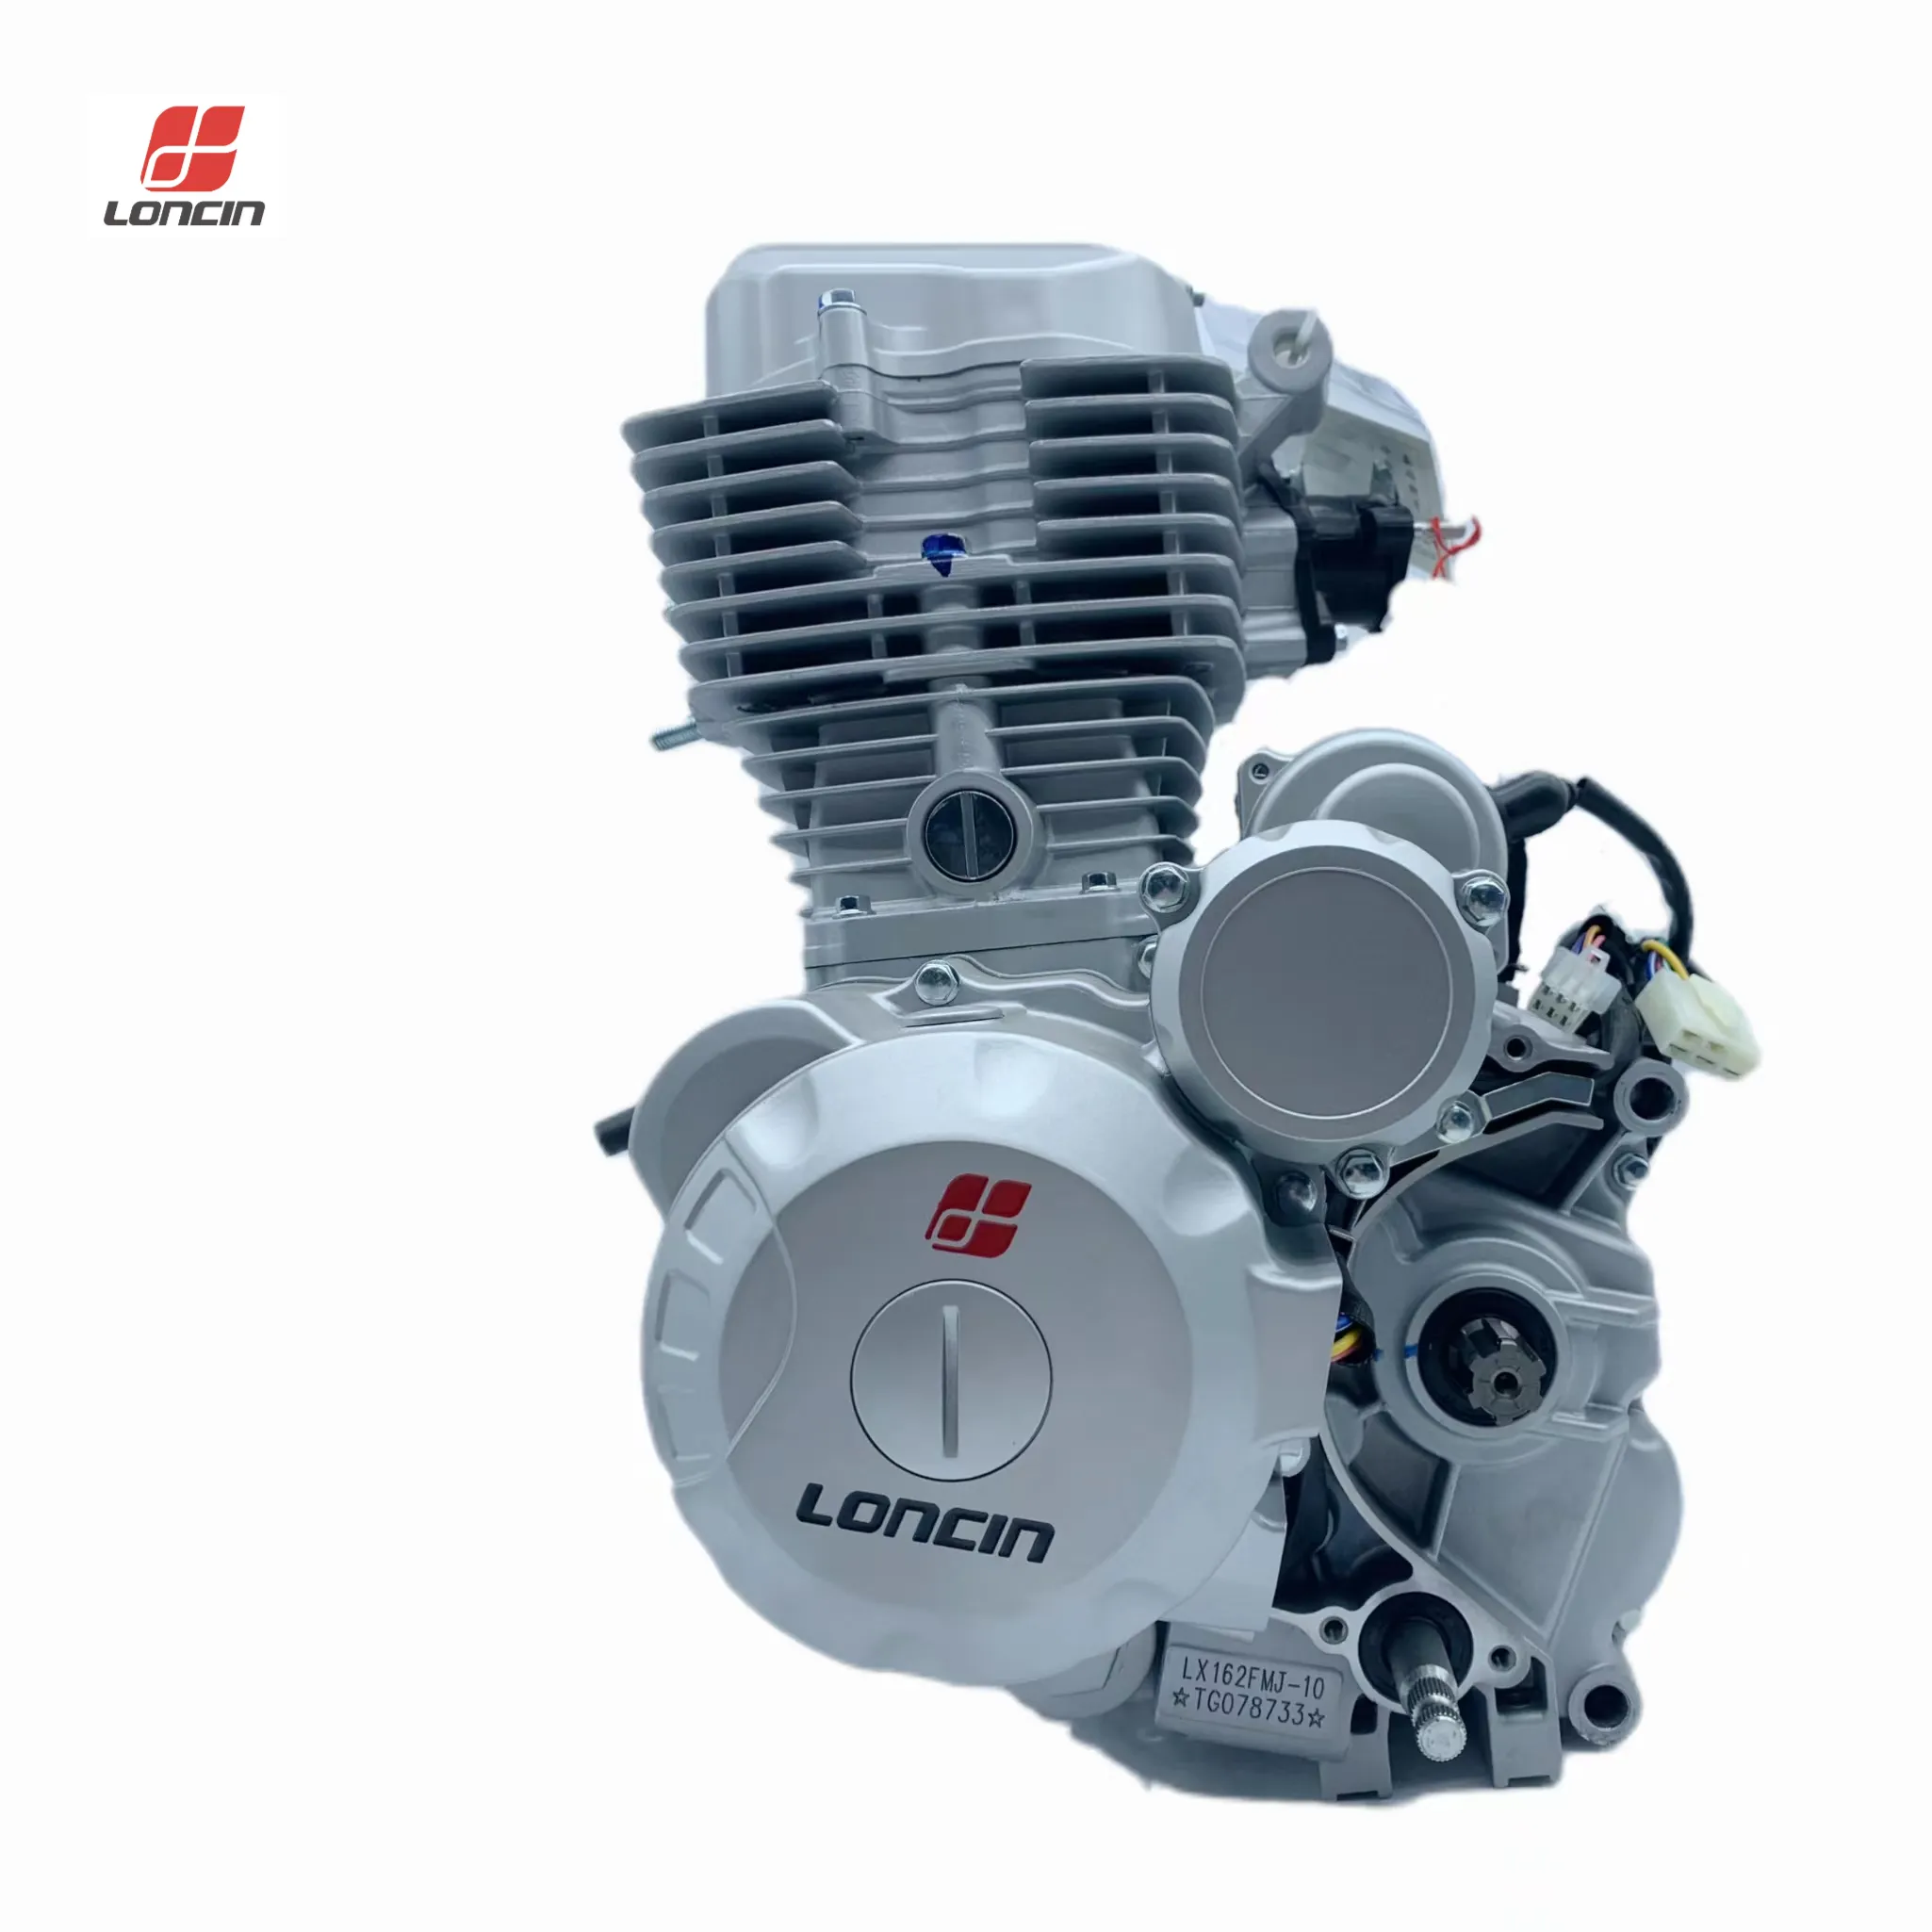 Gasoline Motorcycle Loncin CG125 Engine Assembly Air Cooling Tricycle Spare Parts 4-Stroke Single Cylinder Electrical Kick Start